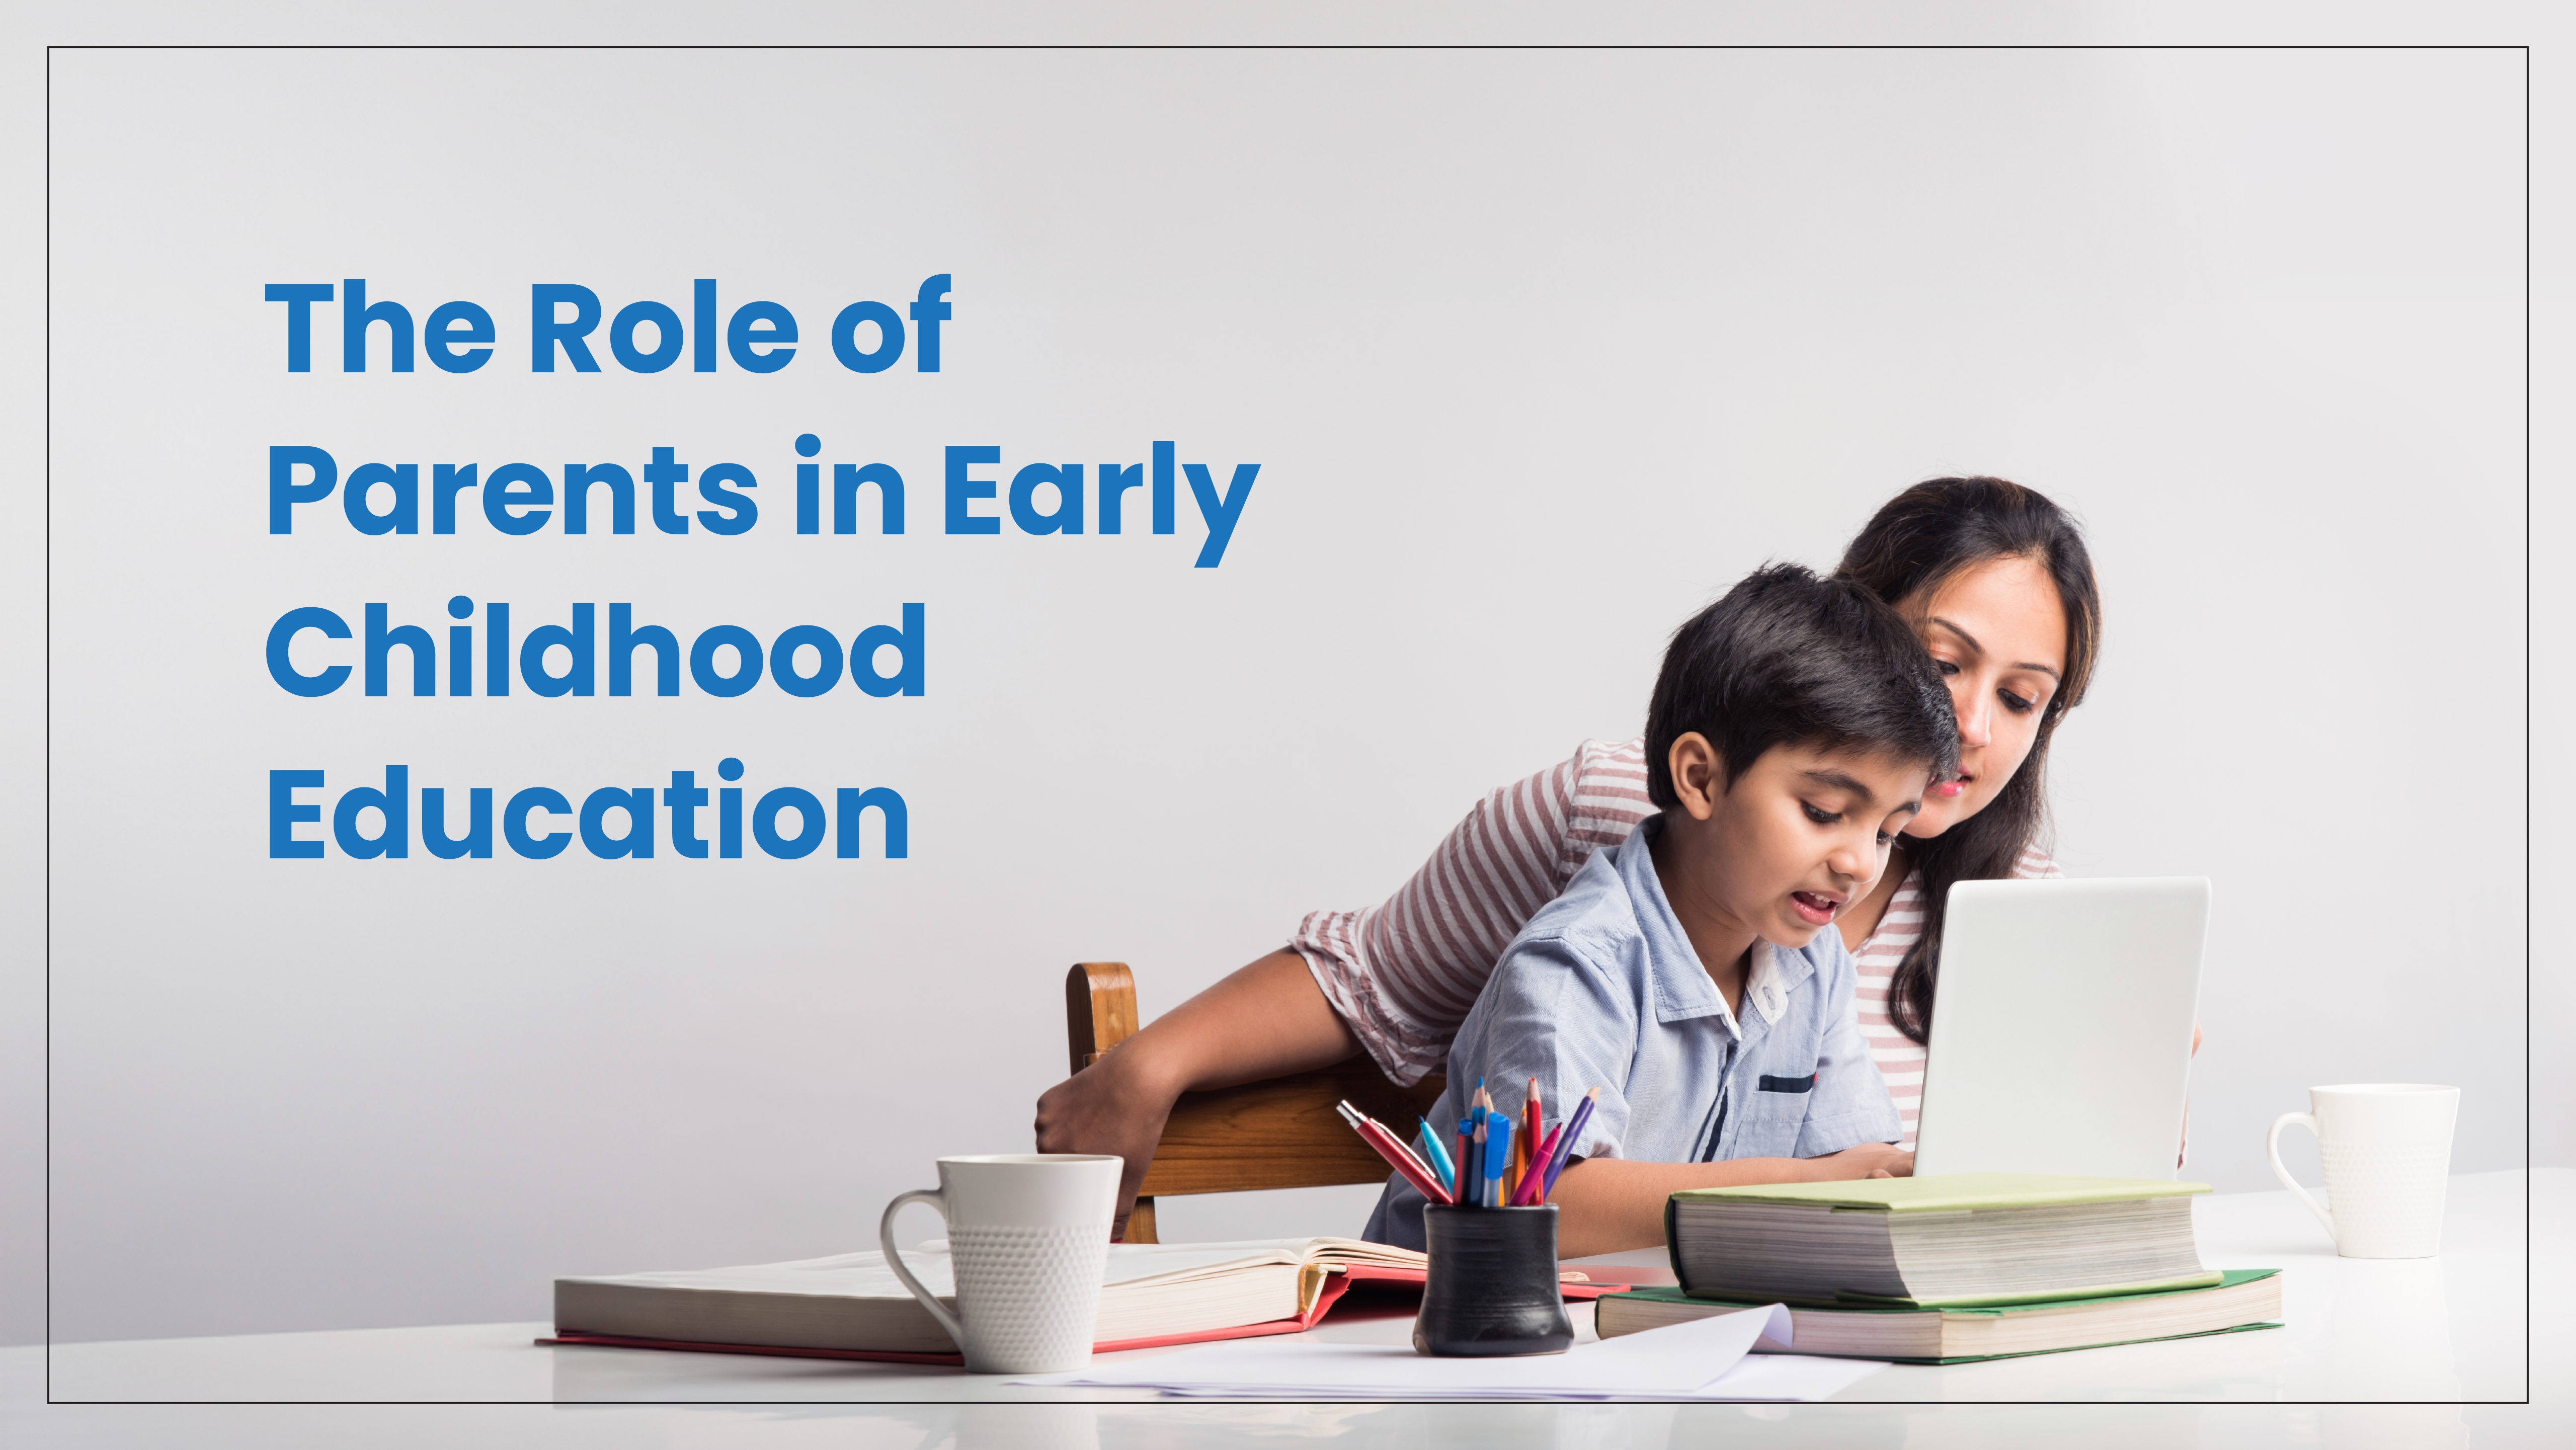 The Role of Parents in Early Childhood Education